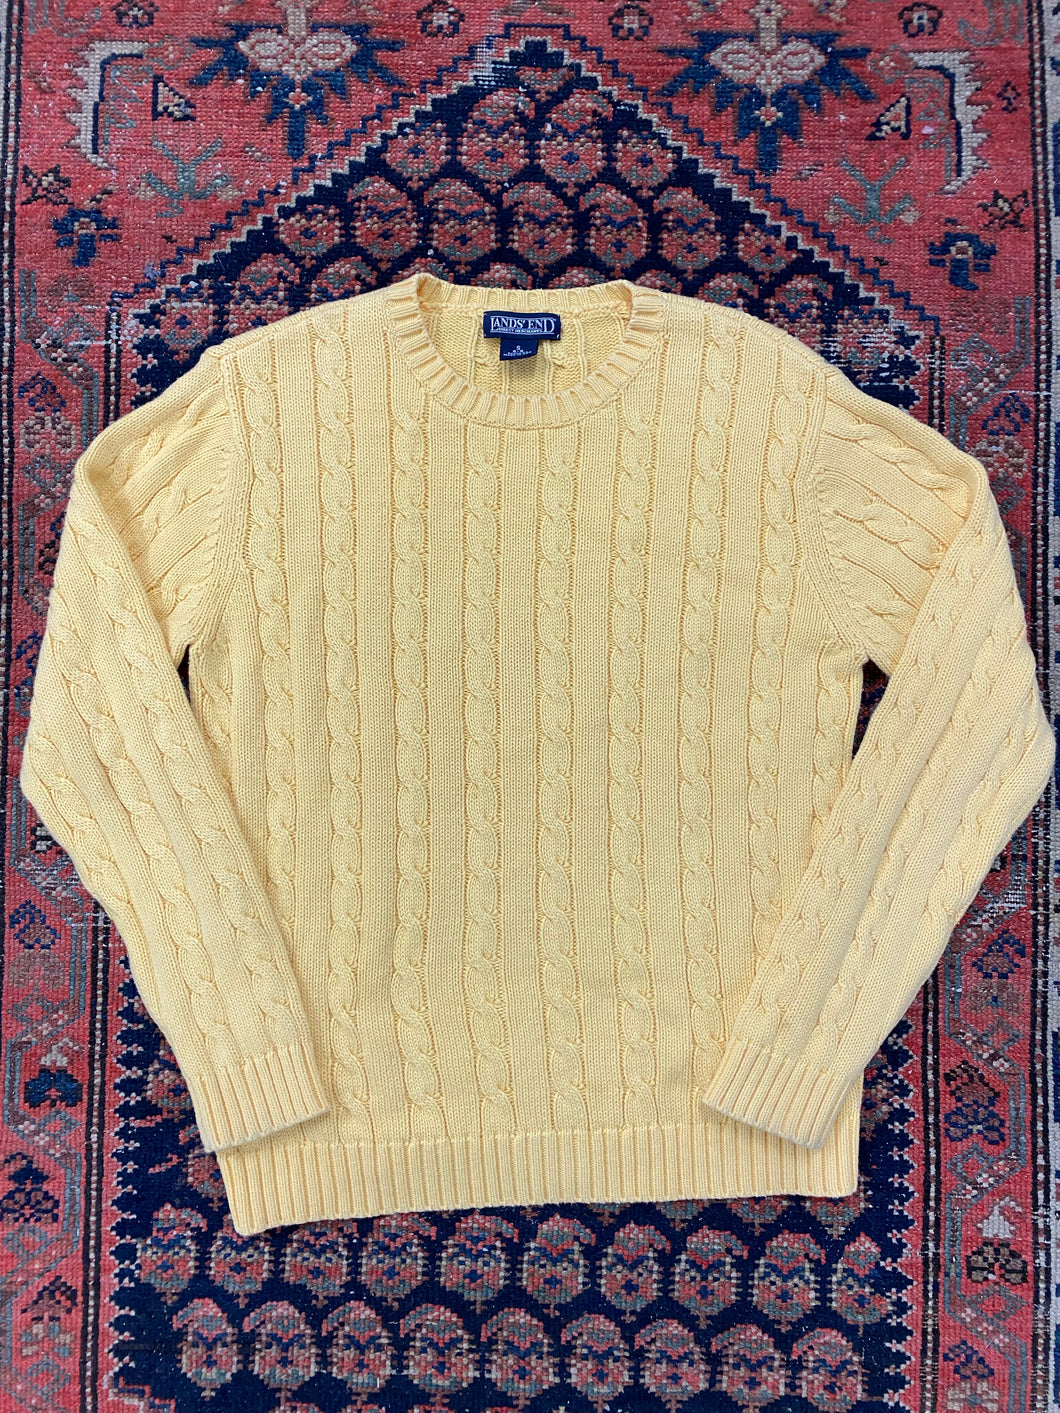 Vintage Yellow Cable Knit - S